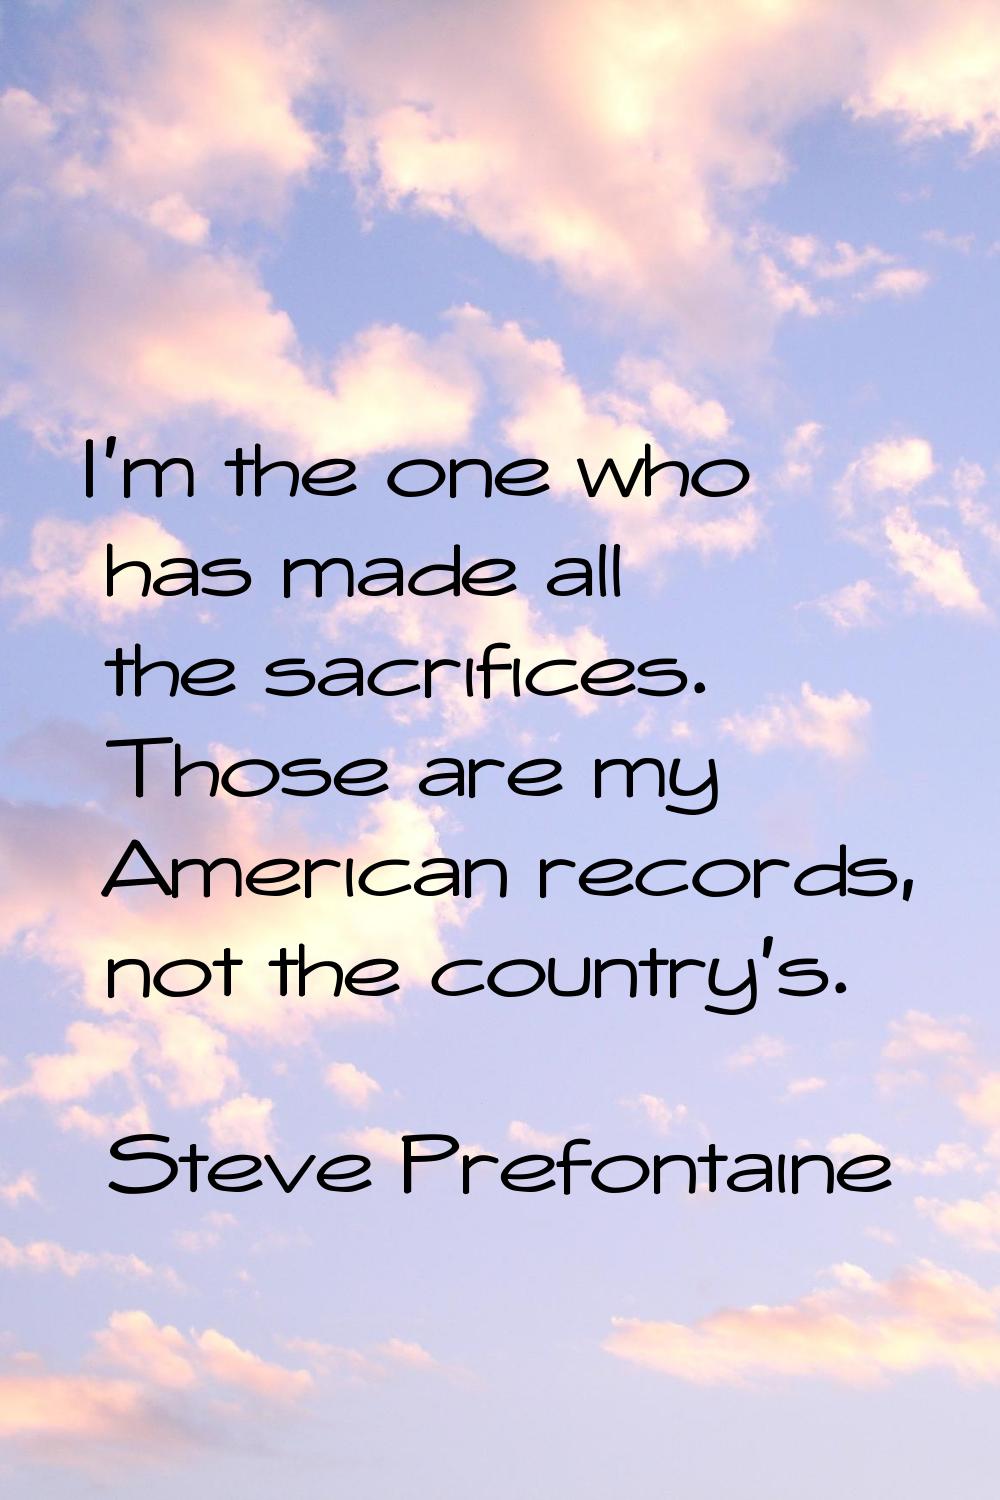 I'm the one who has made all the sacrifices. Those are my American records, not the country's.